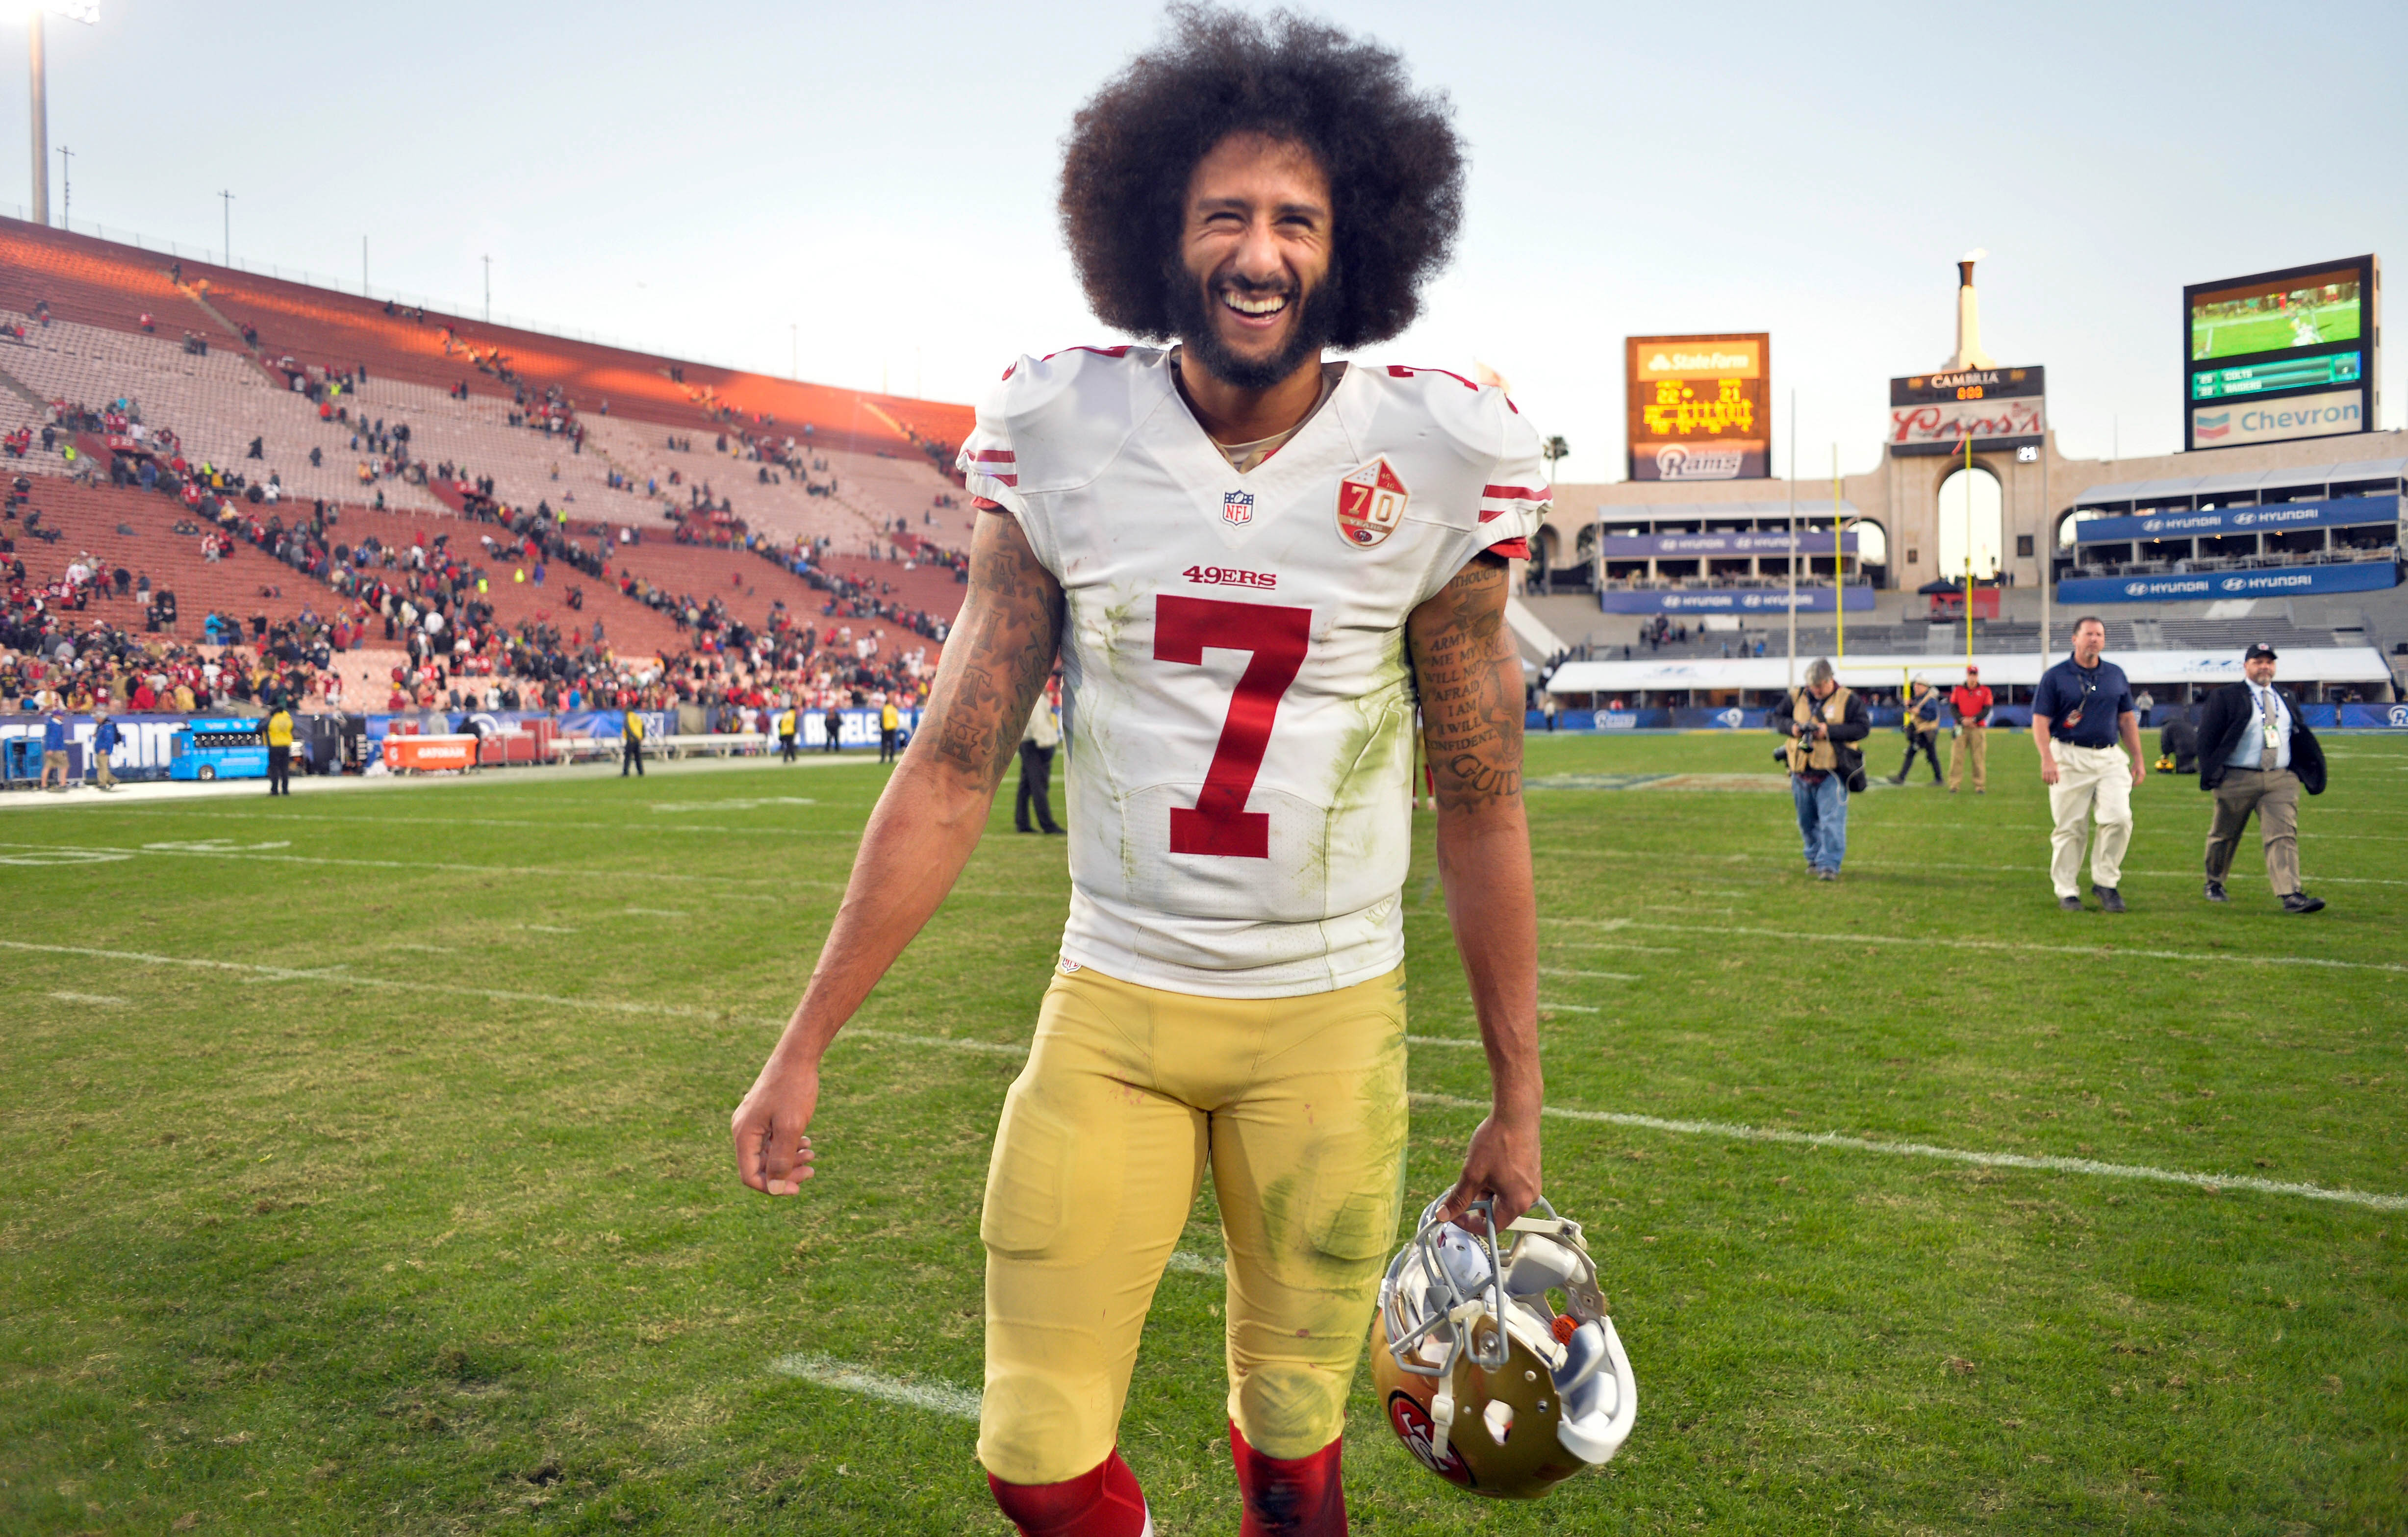 After Vick's Haircut Advice, Kaepernick Posts about Stockholm Syndrome